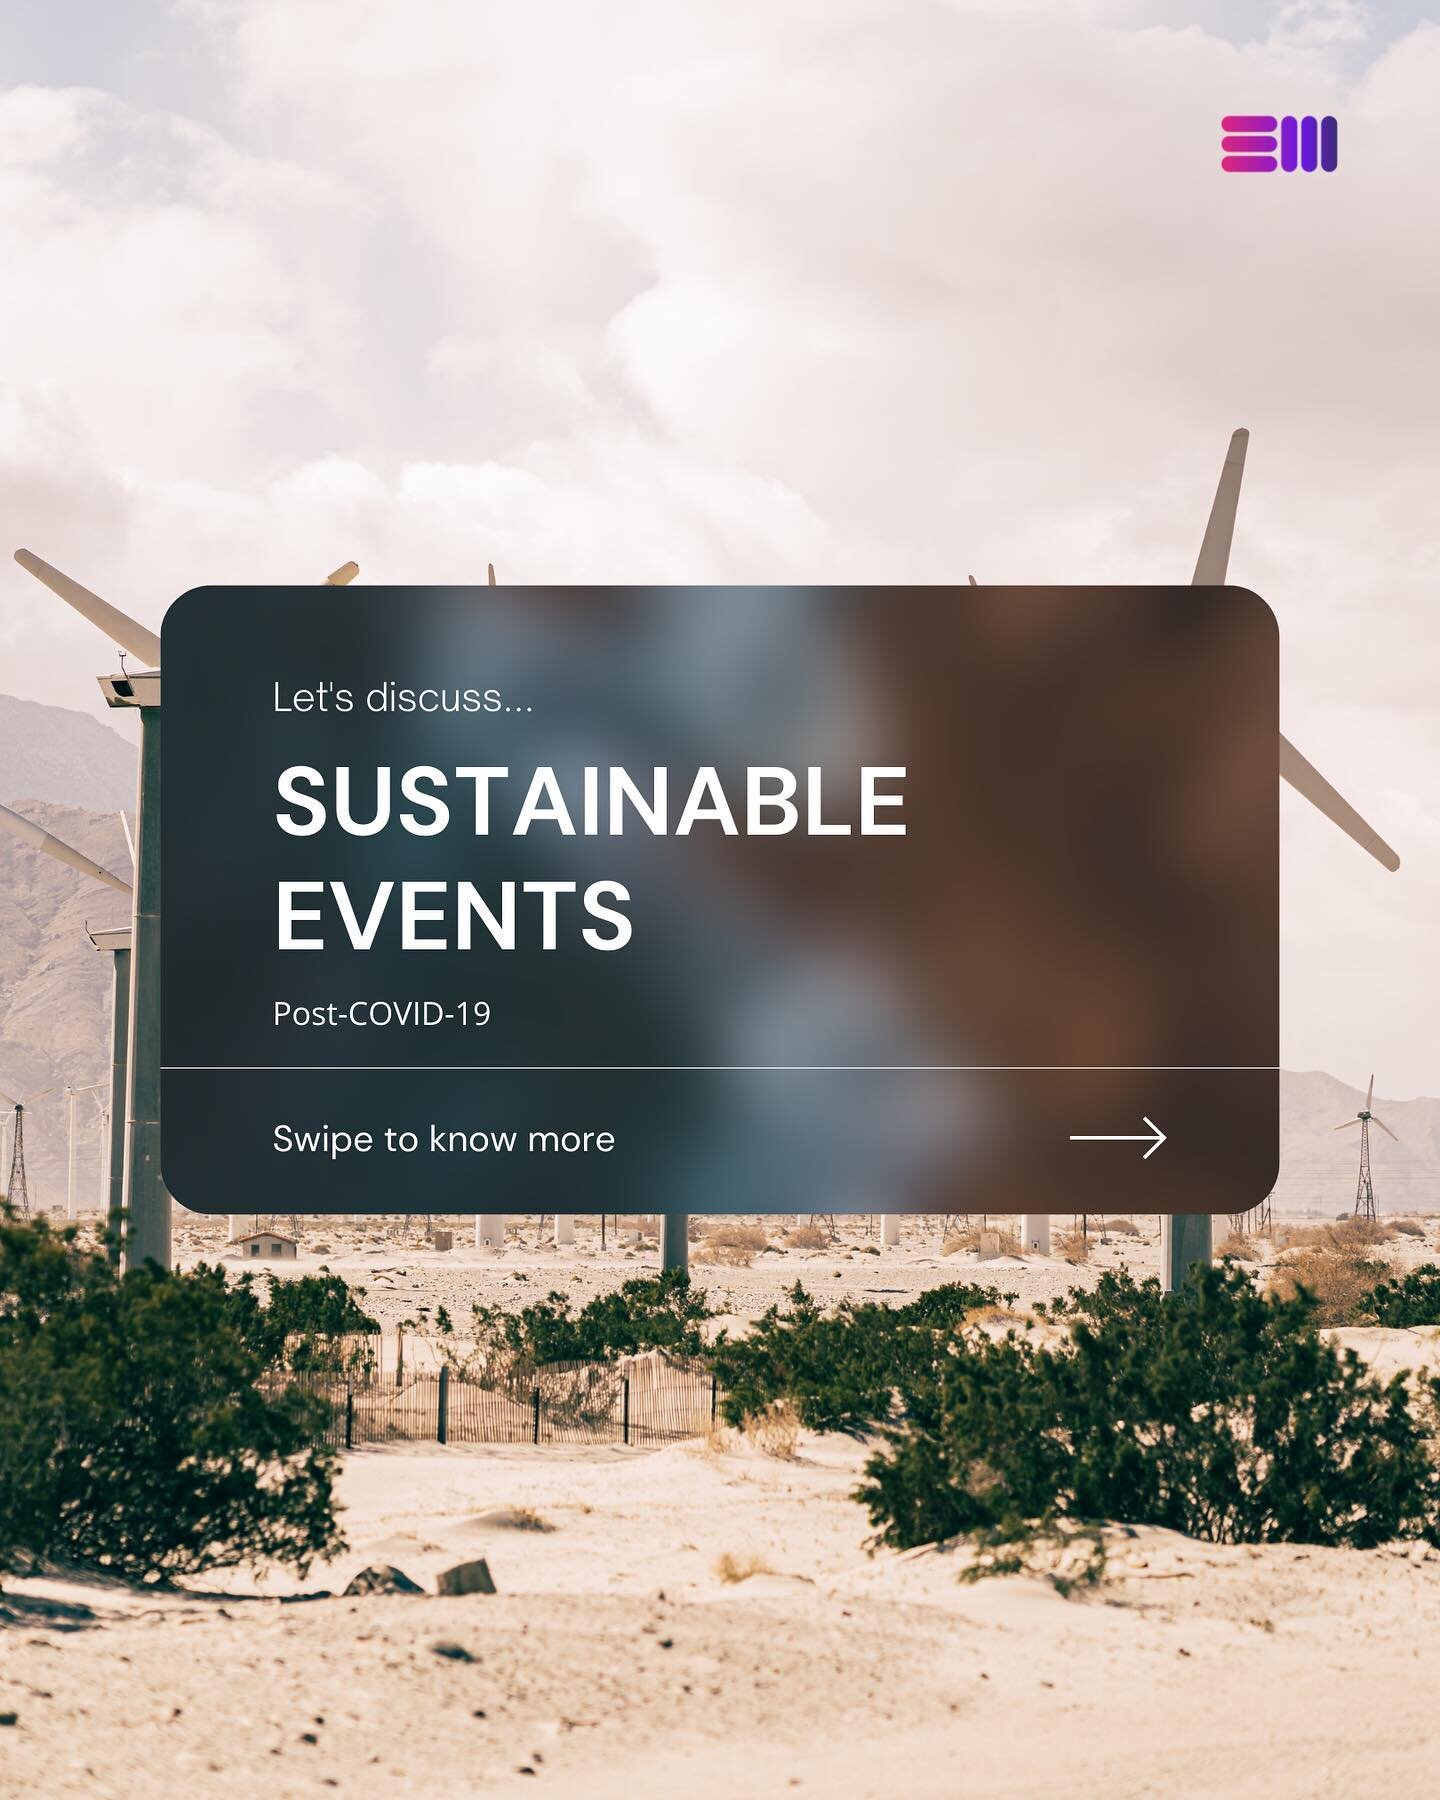 As event planners, we have a responsibility to pay attention to how tourism impacts local, national and global environments.

Together, we can create sustainable events for our future by analyzing the social, economic and environmental impacts of our